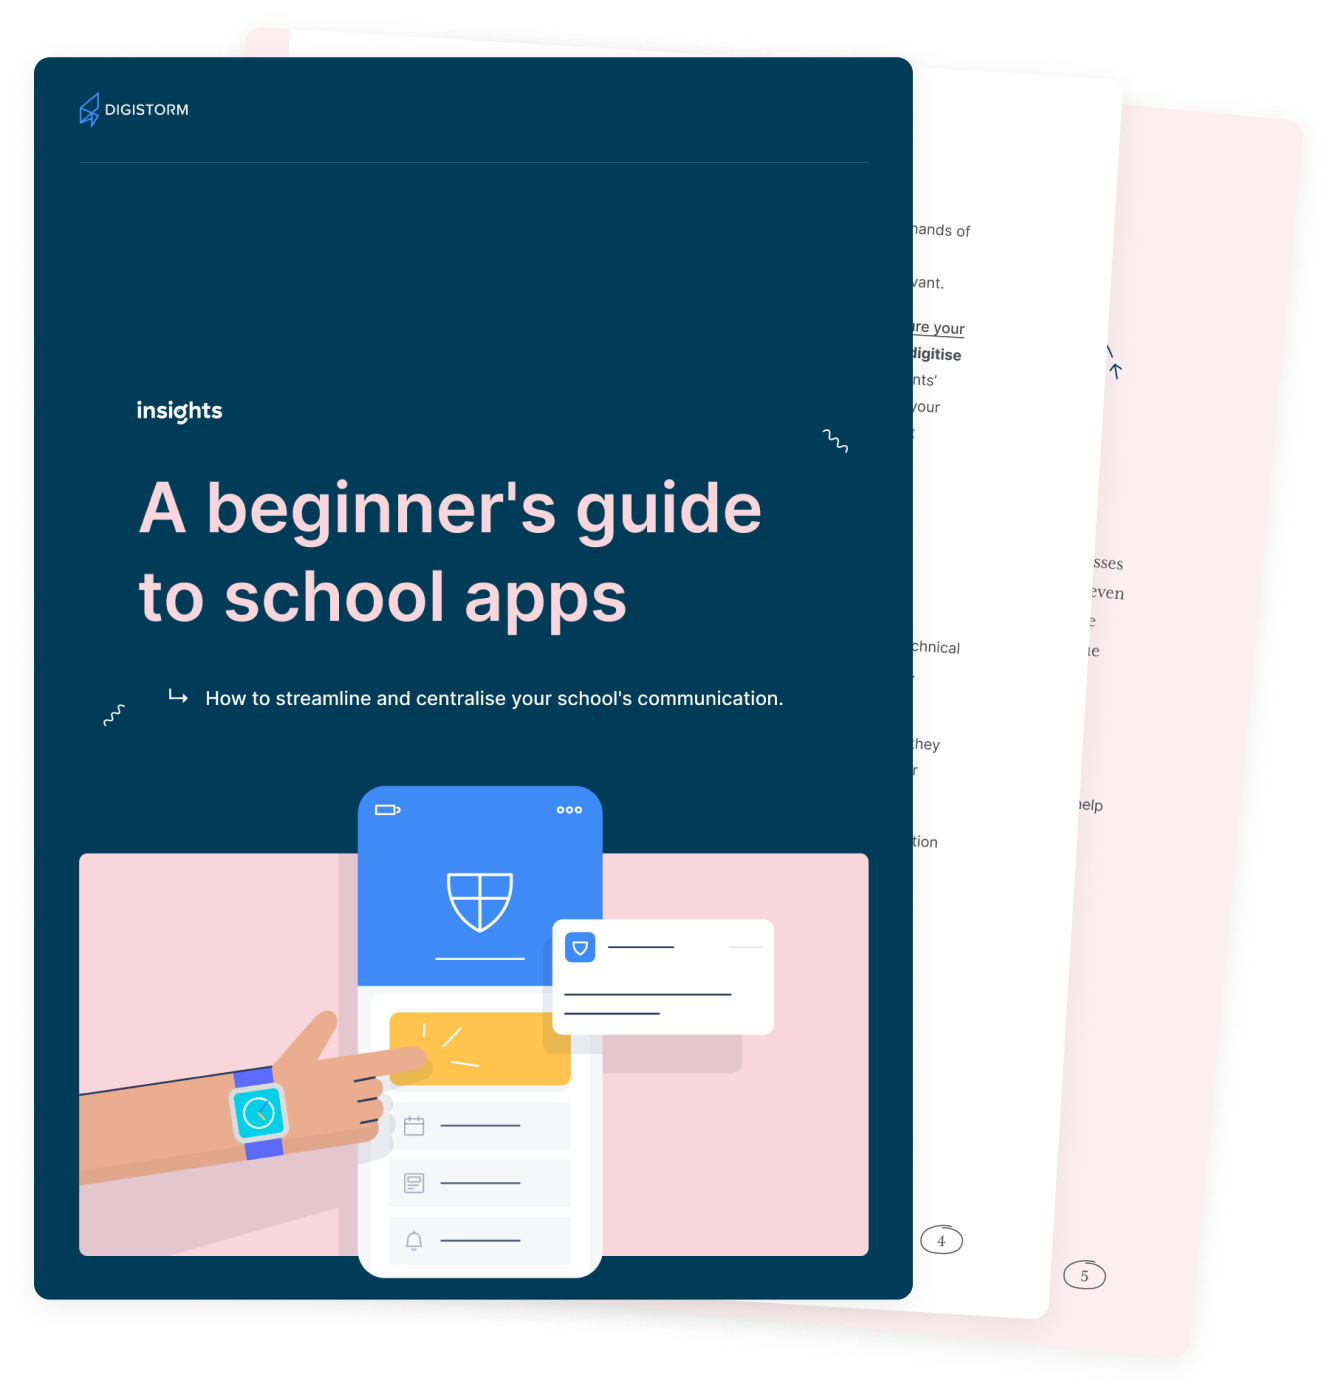 A beginners guide to school apps - guide cover